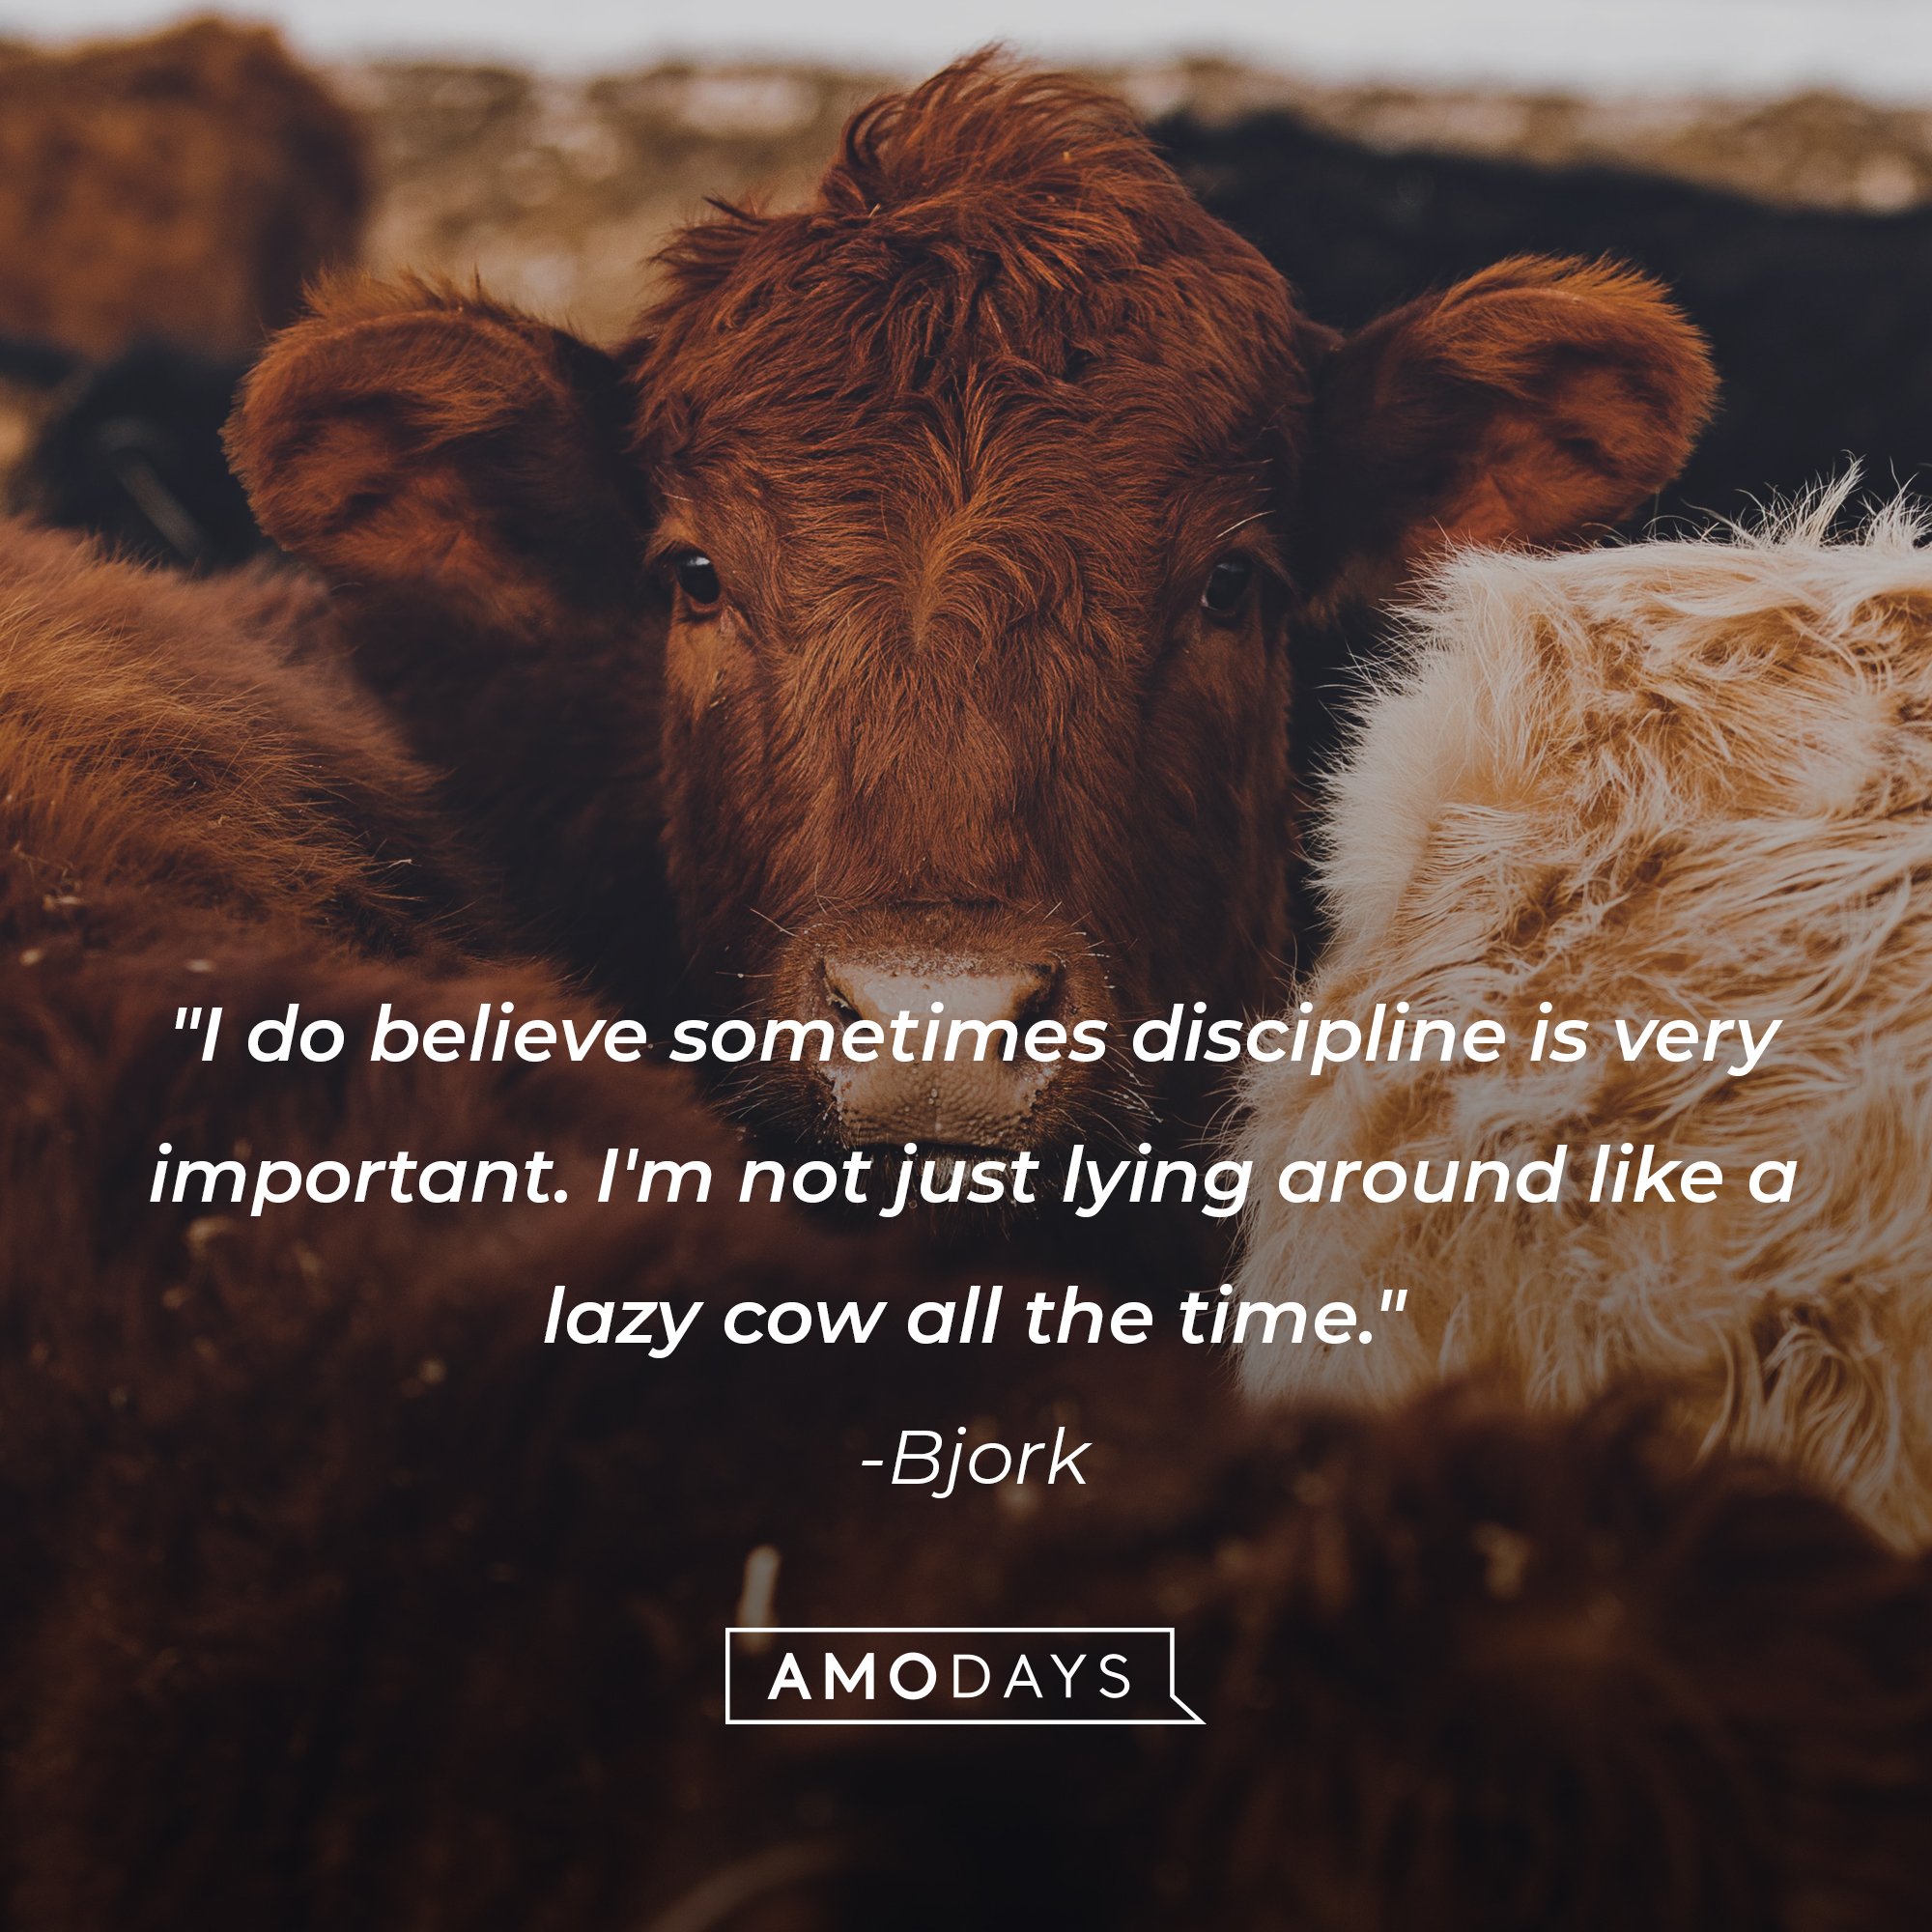 Bjork’s quote: "I do believe sometimes discipline is very important. I'm not just lying around like a lazy cow all the time." | Image: AmoDays